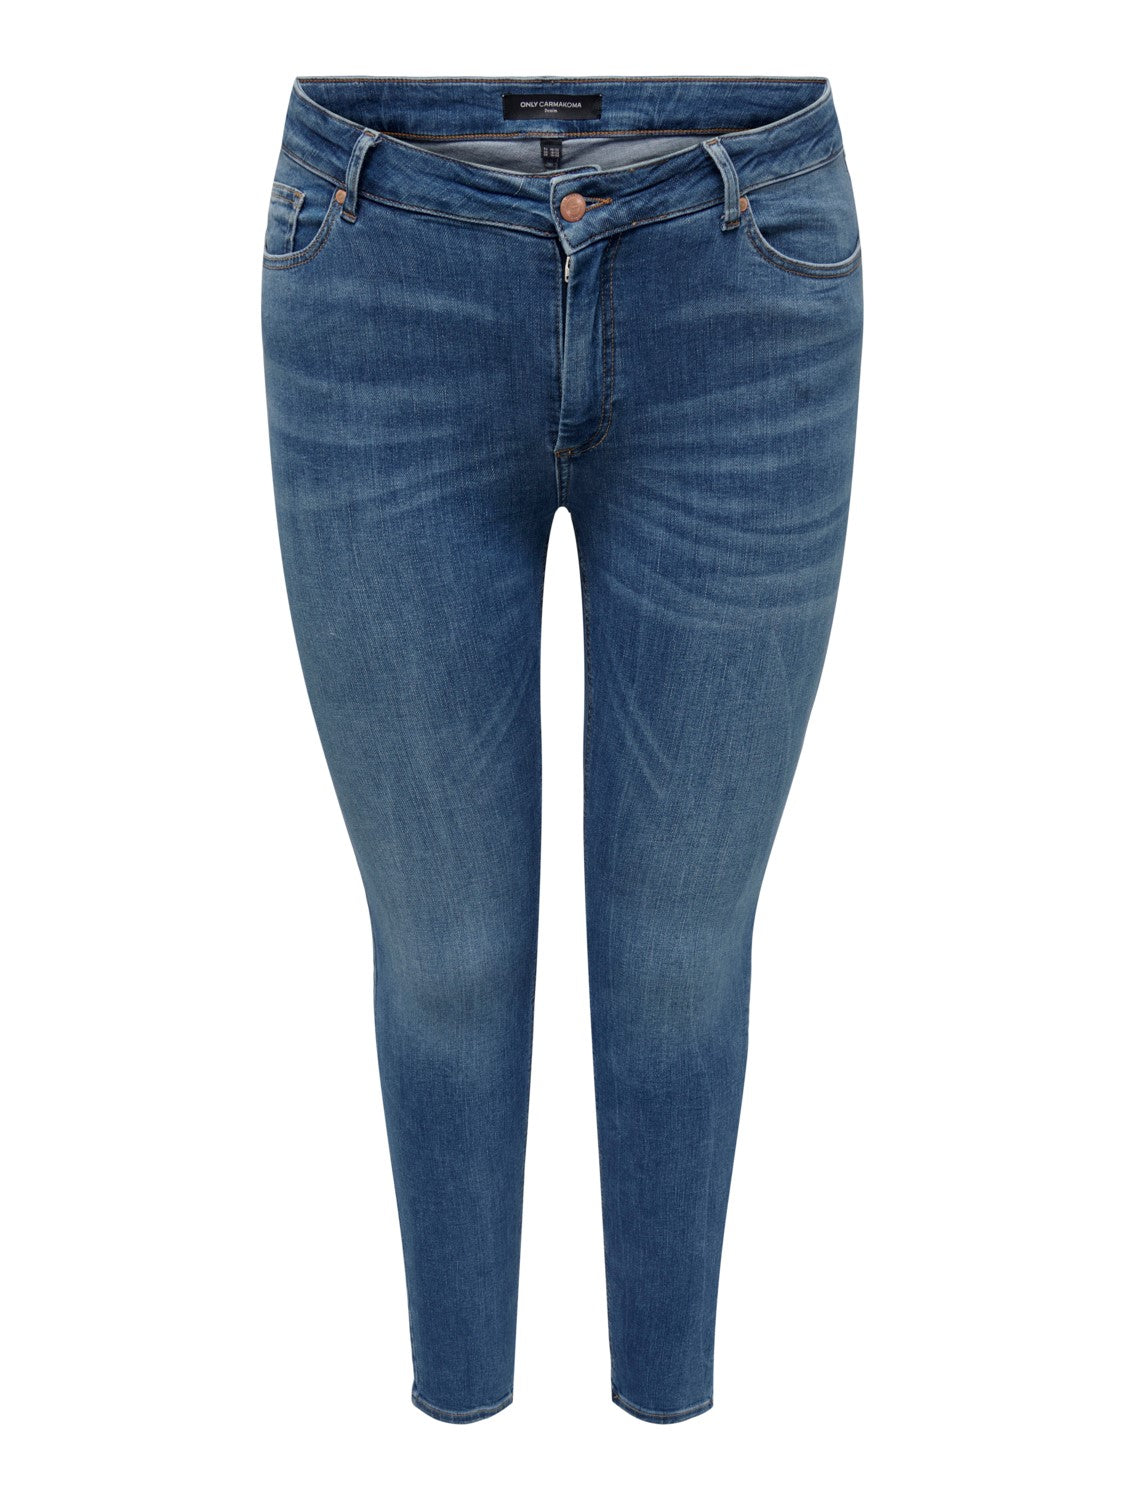 Only Carmakoma Carwilly Broek/Jeans